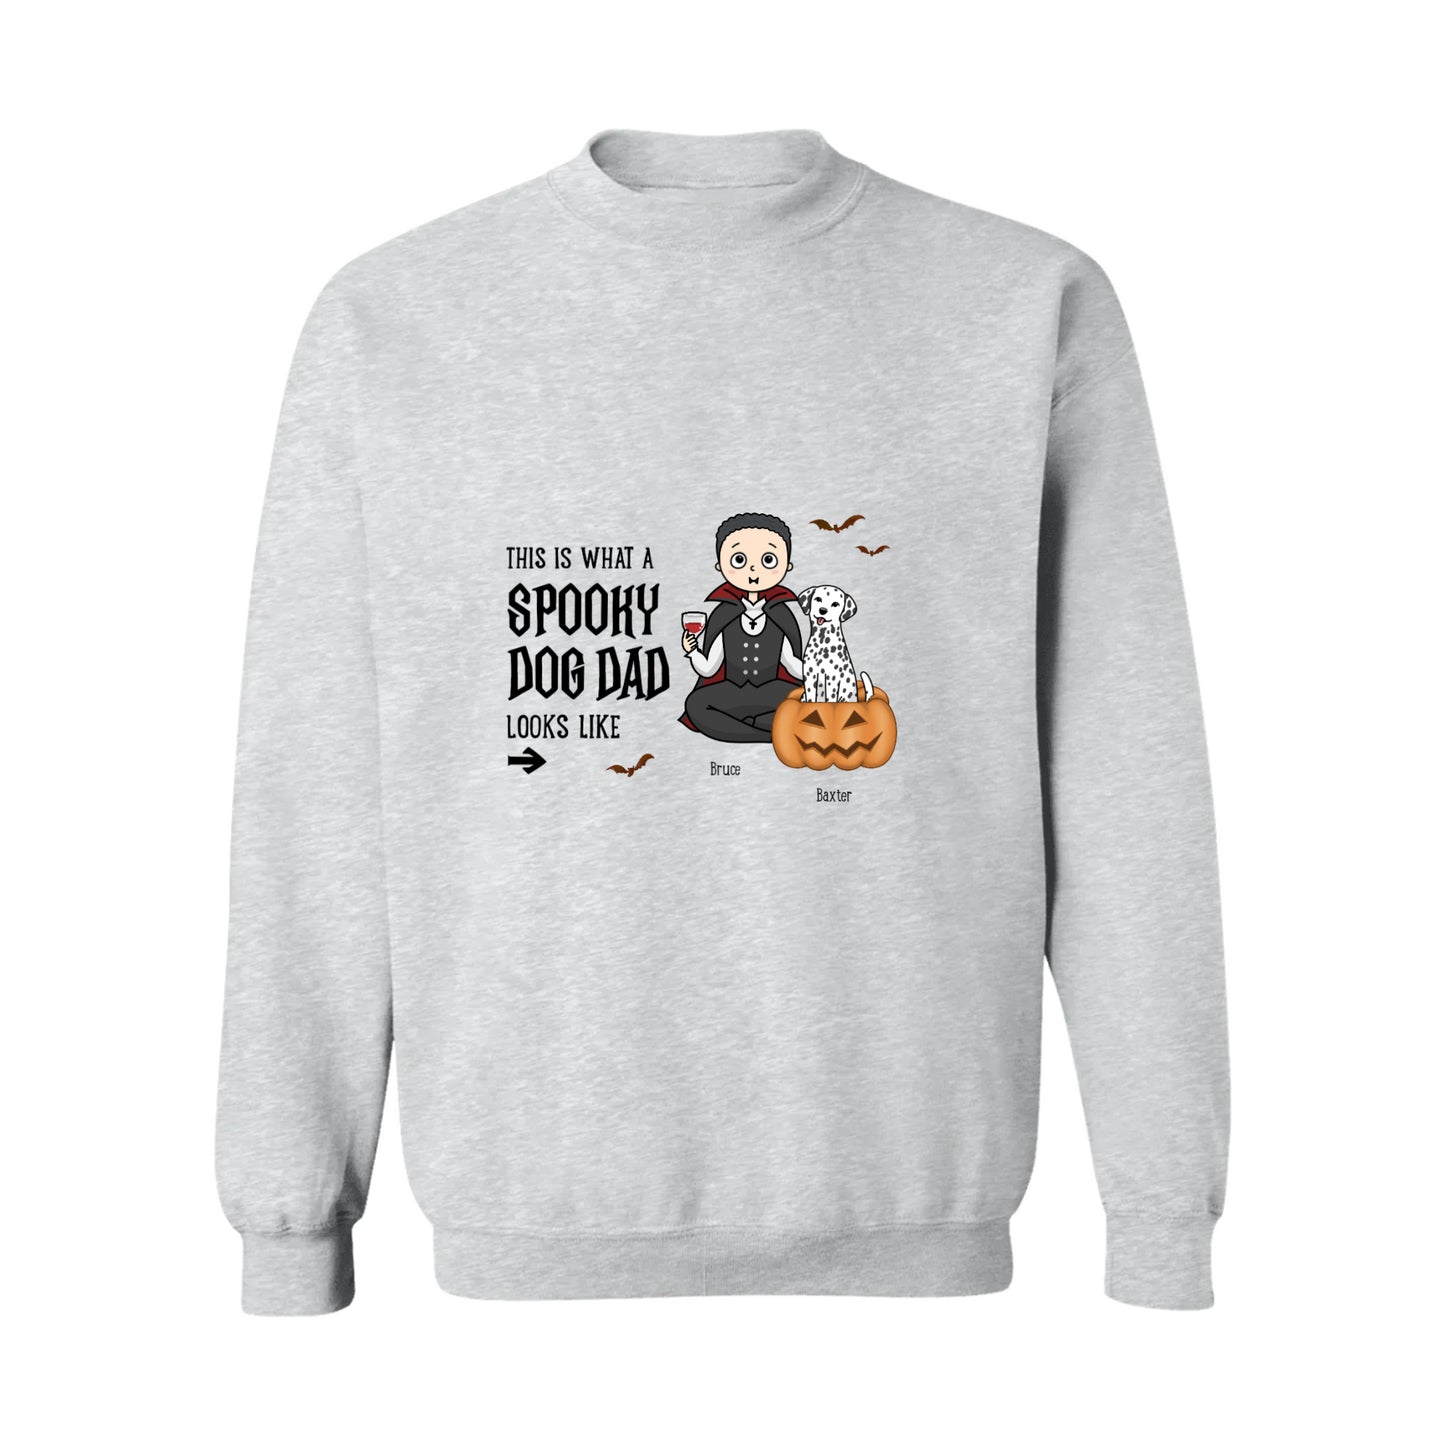 This Is What A Spooky Dog Dad Looks Like Crewneck Pullover Sweatshirt